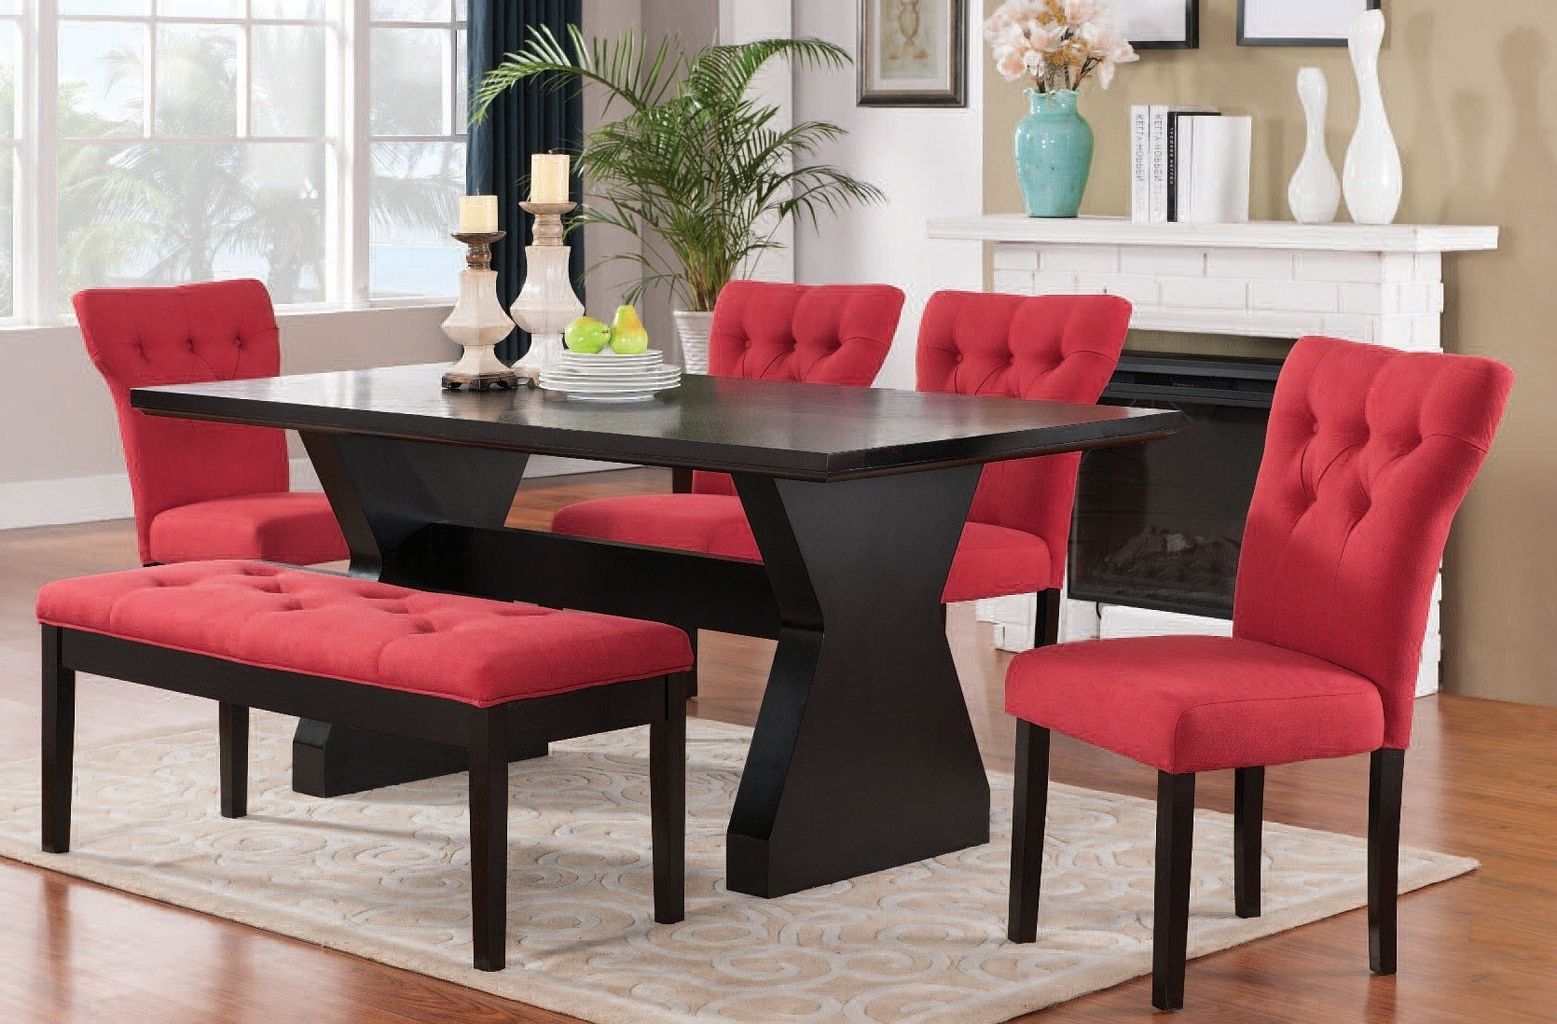 Red Dining Chairs For Your Dining Rooms – Home Decor Ideas In Most Recently Released Red Dining Tables And Chairs (View 2 of 25)